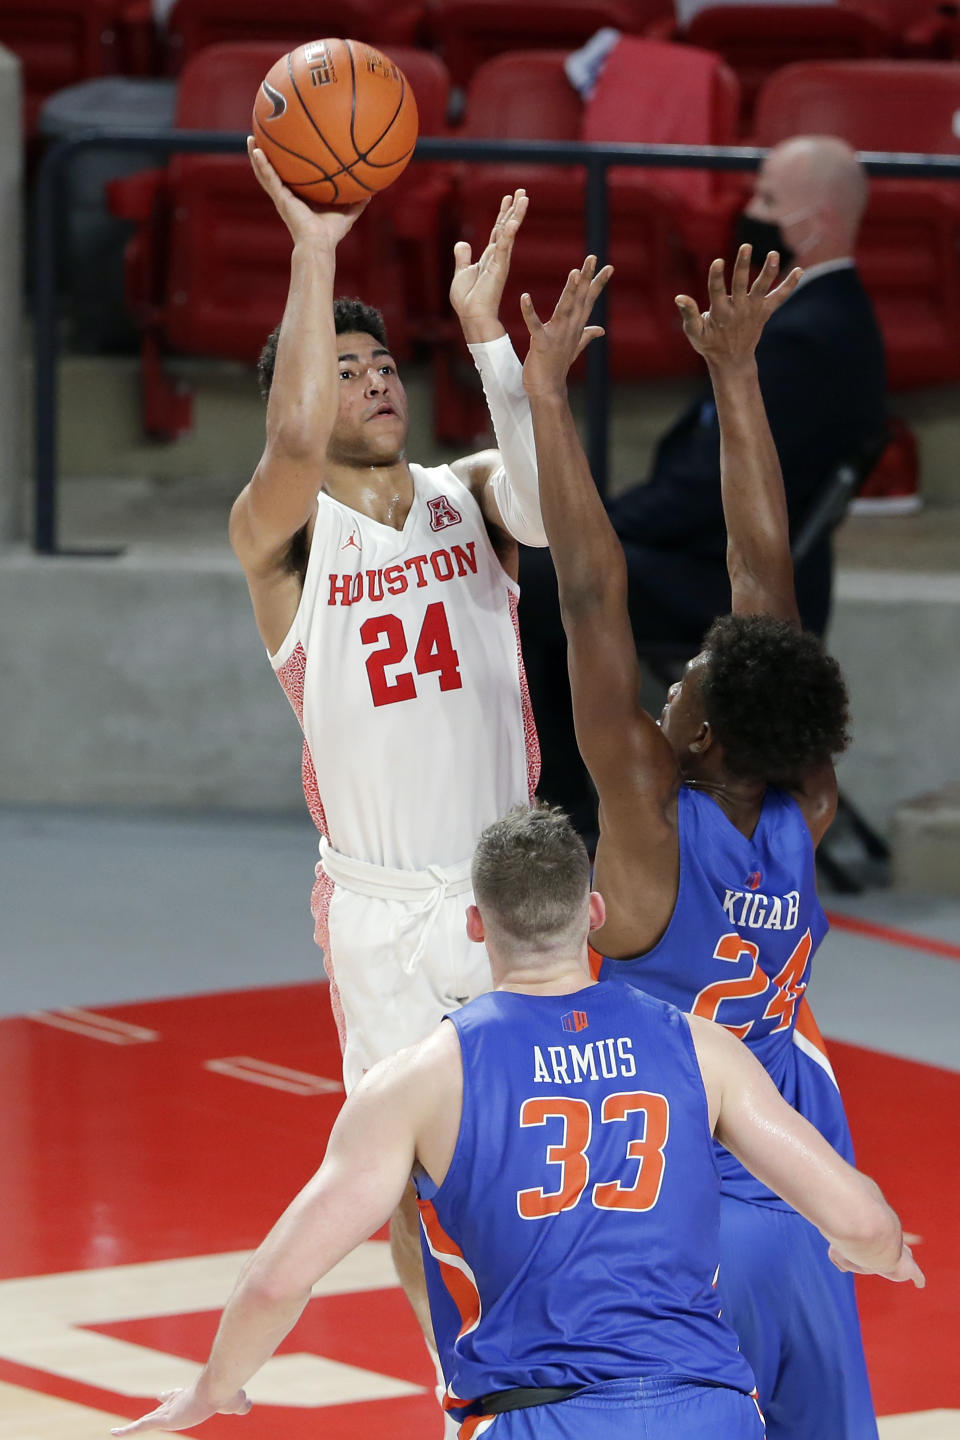 Houston guard Quentin Grimes (24) puts up a shot over Boise State forward Abu Kigab (24) and forward Mladen Armus (33) during the first half of an NCAA college basketball game Friday, Nov. 27, 2020, in Houston. (AP Photo/Michael Wyke)